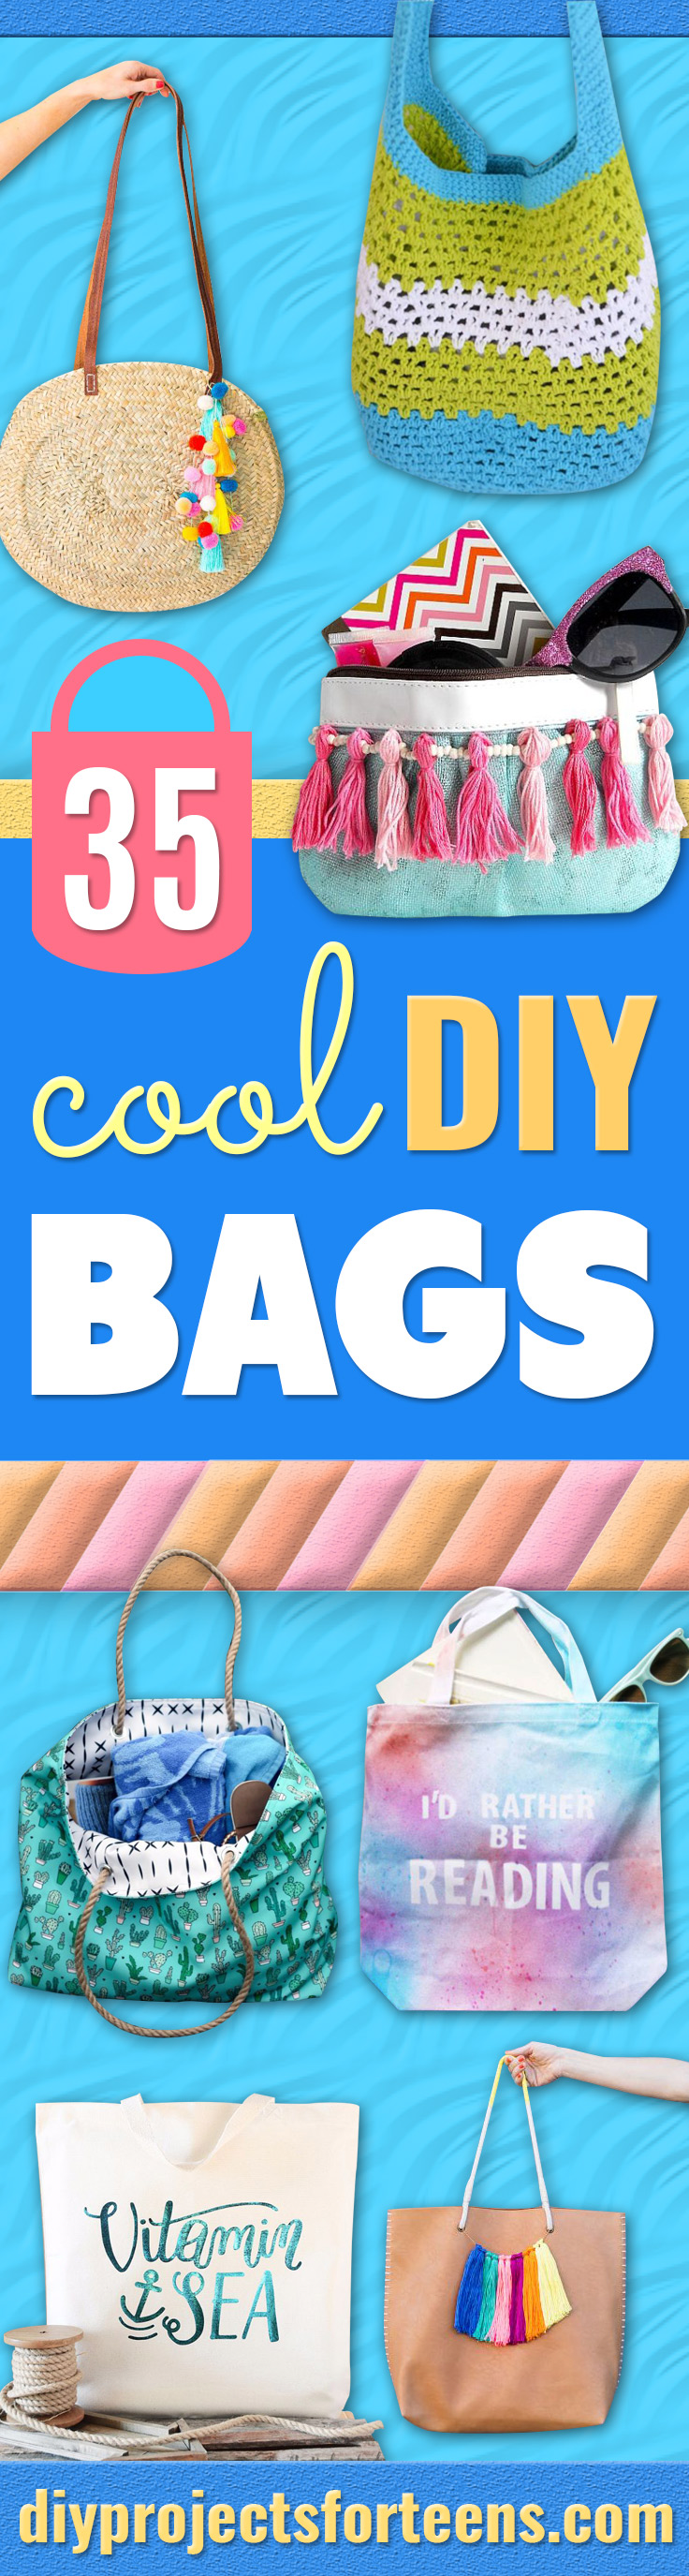 DIY Bags for Summer - Easy Ideas to Make for Beach and Pool - Quick Projects for a Bag on A Budget - Cute No Sew Idea, Quick Sewing Patterns - Paint and Crafts for Making Creative Beach Bags - Fun Tutorials for Kids, Teens, Teenagers, Girls and Adults http://stage.diyprojectsforteens.com/diy-bags-summer